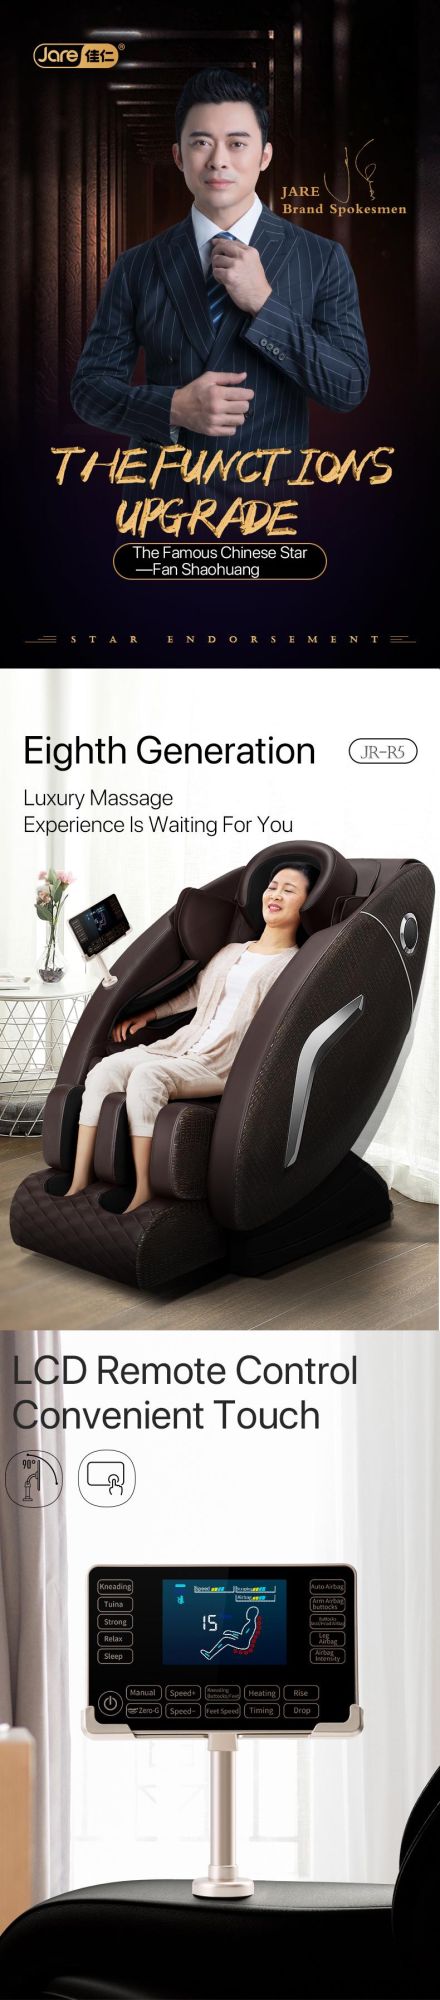 New Wholesale Leather 3D Zero Gravity Full Body Relax Massage Chair